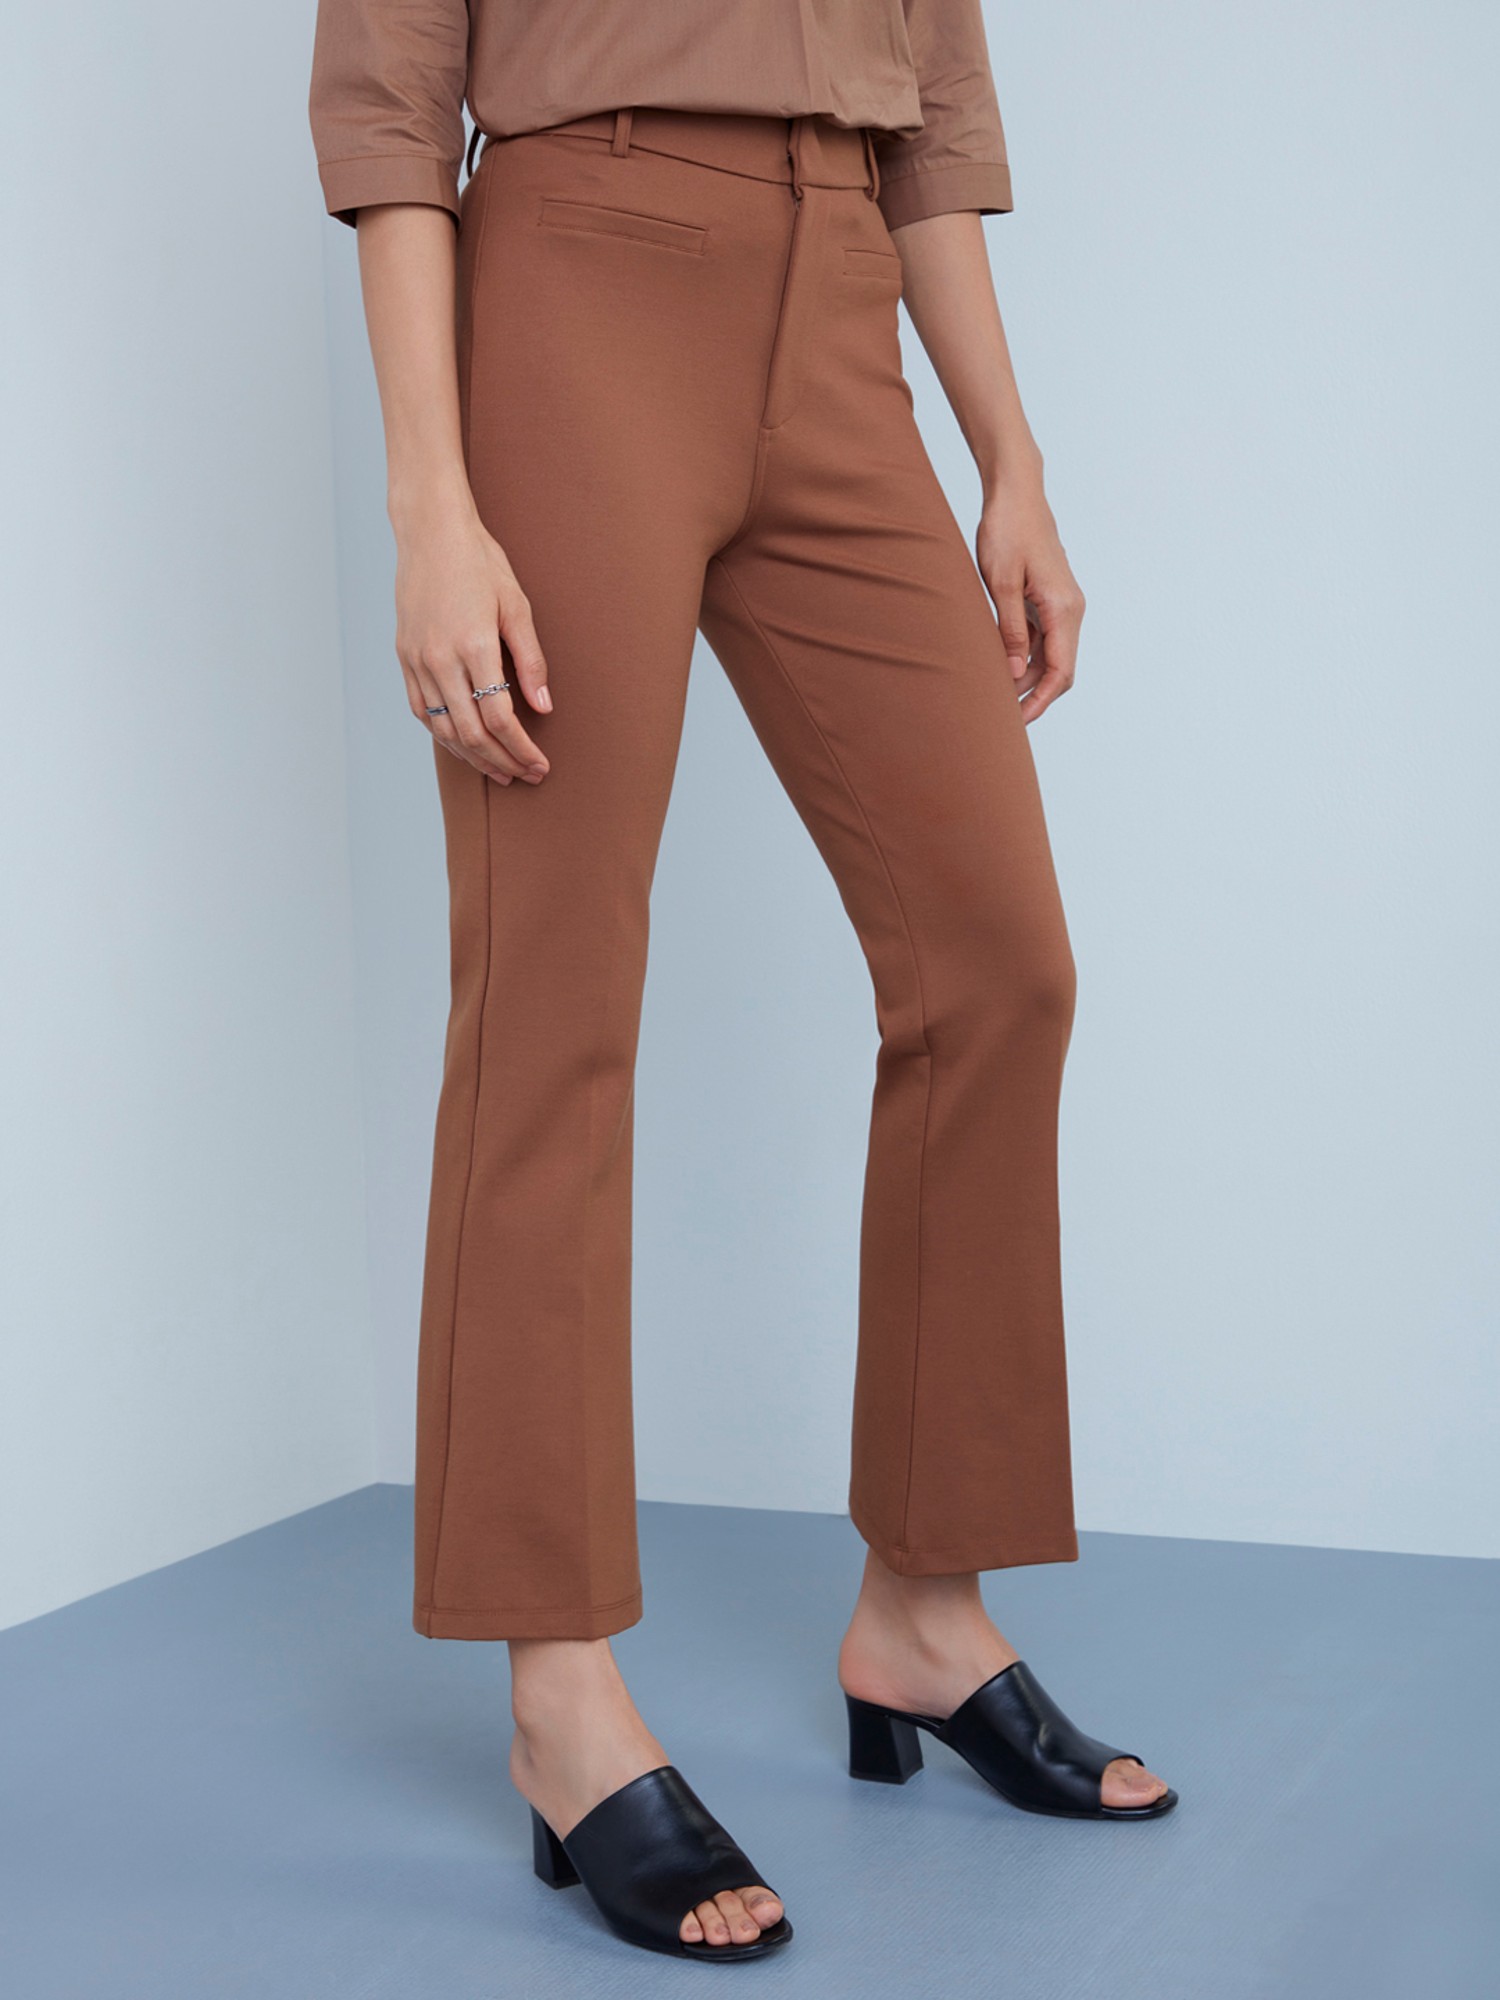 20 Pairs of Flared Pants to Kickstart Your Style